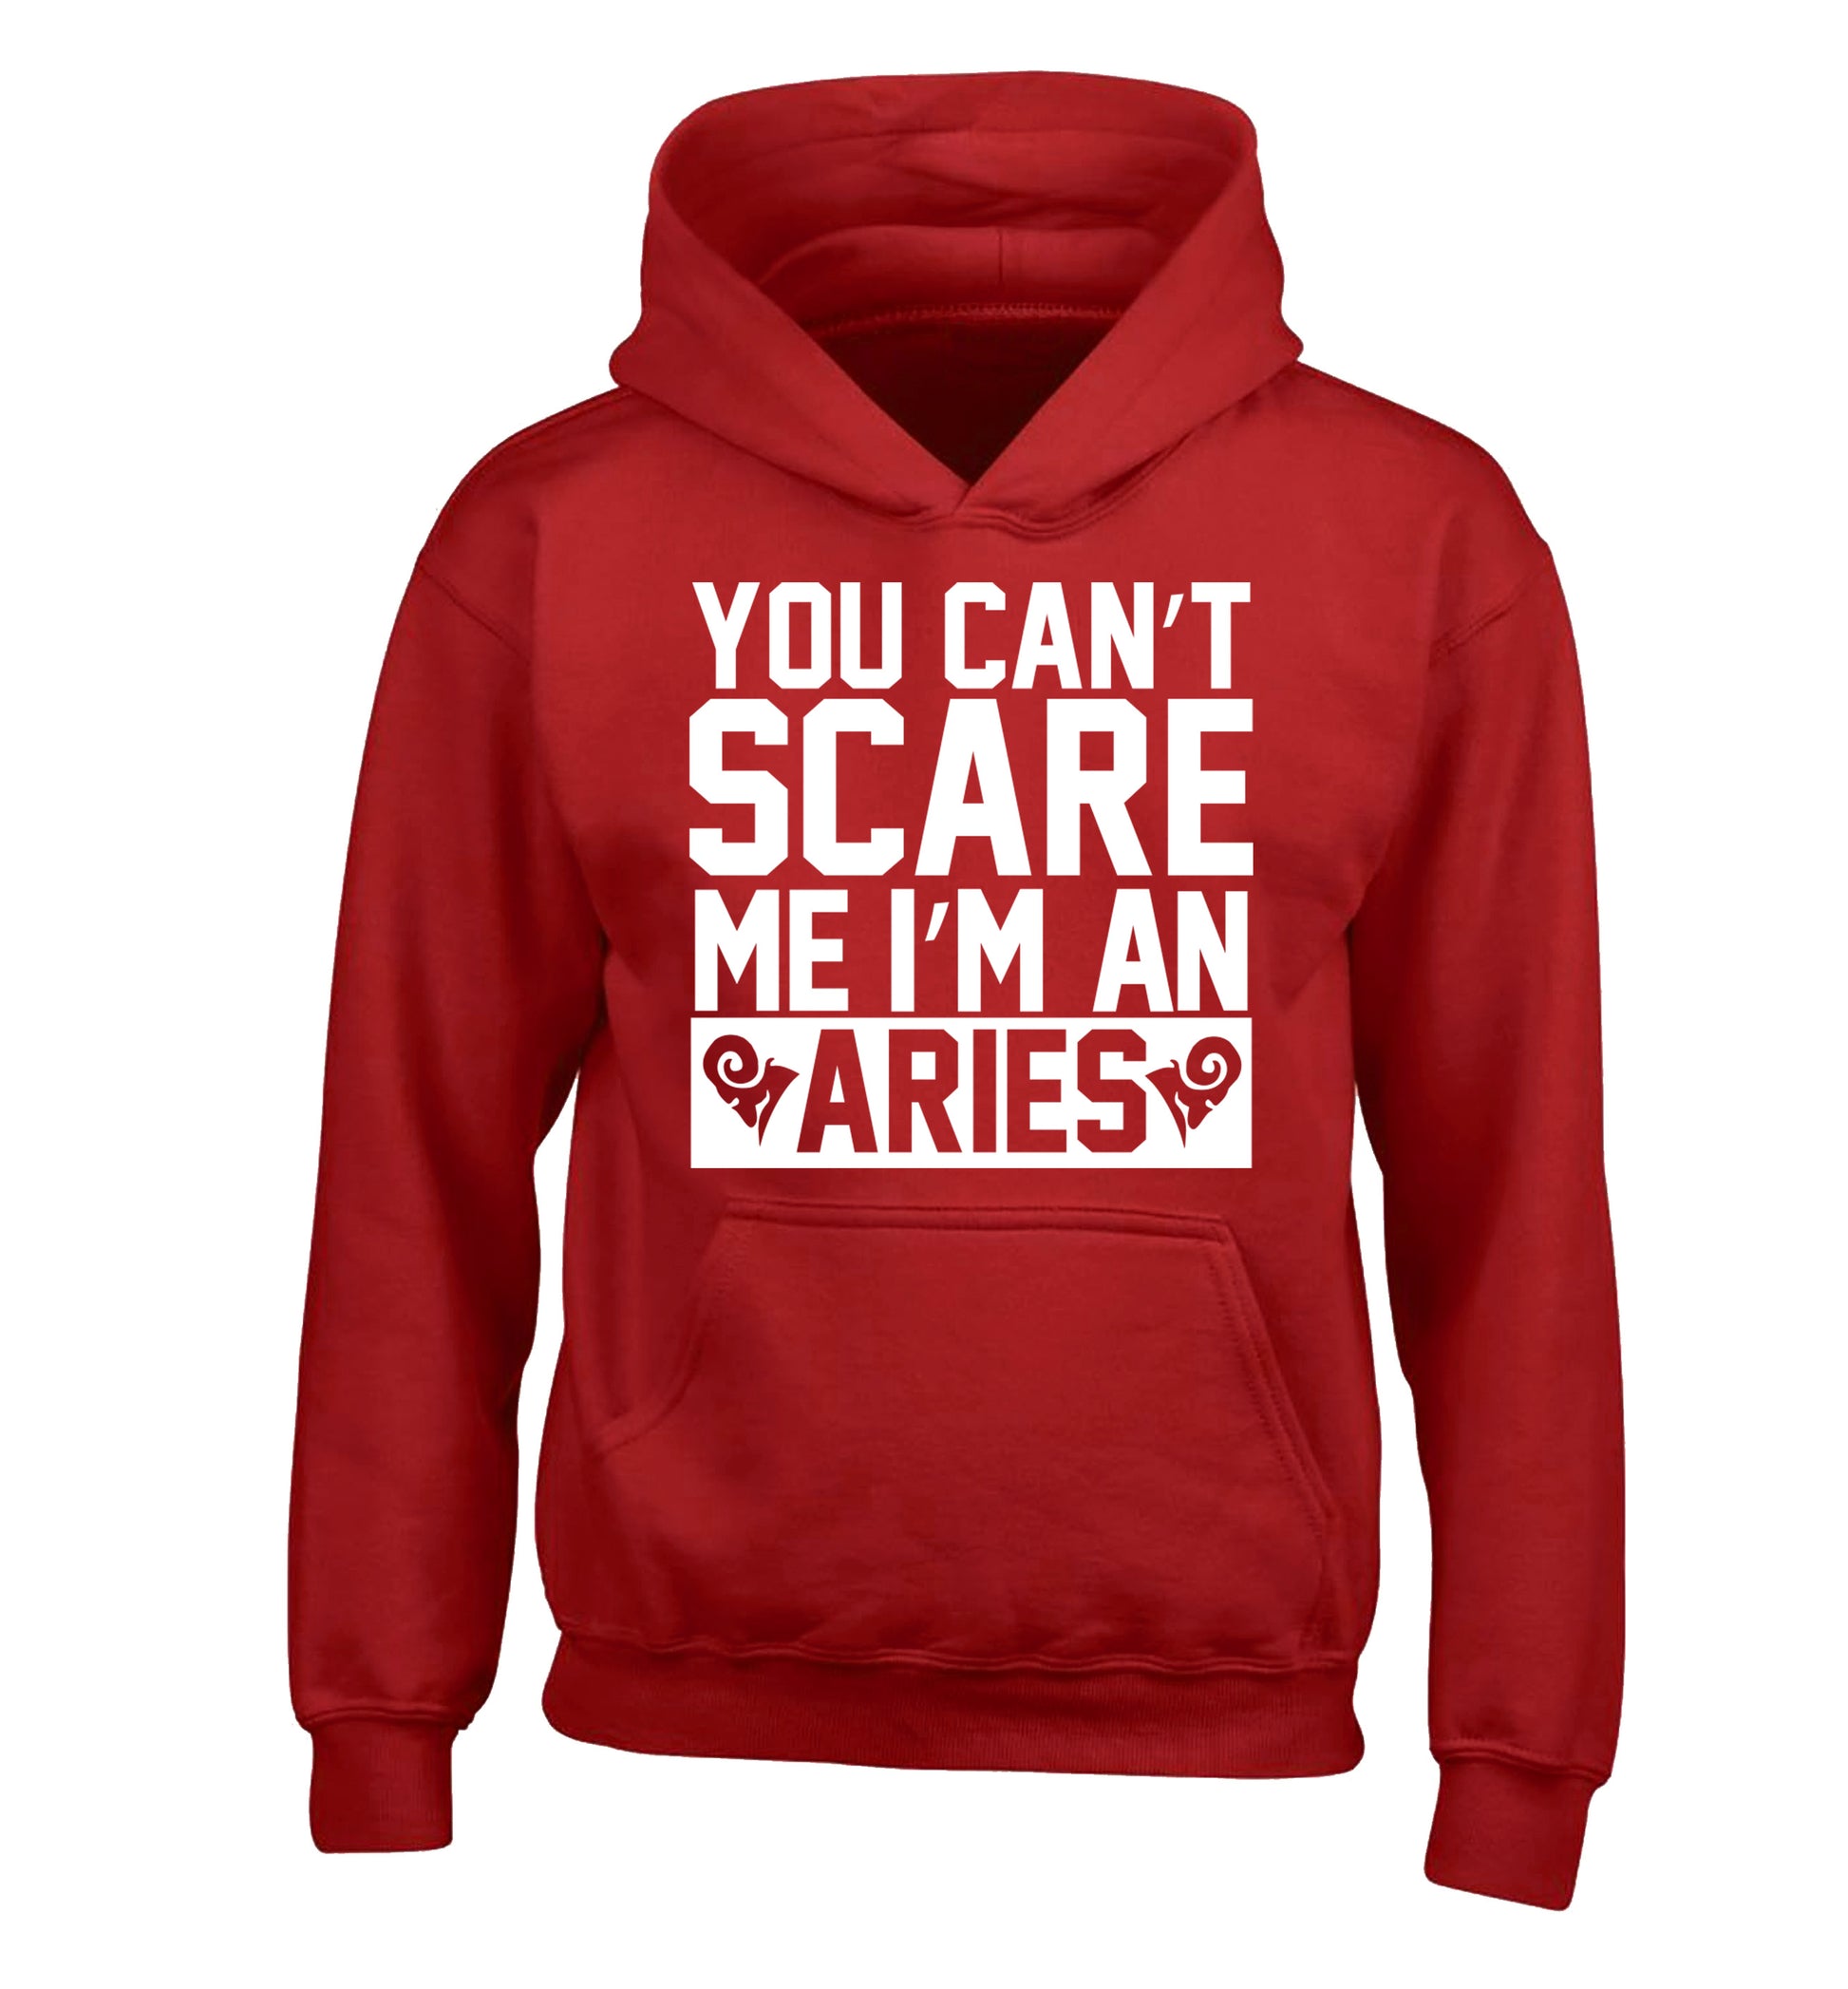 You can't scare me I'm an aries children's red hoodie 12-13 Years